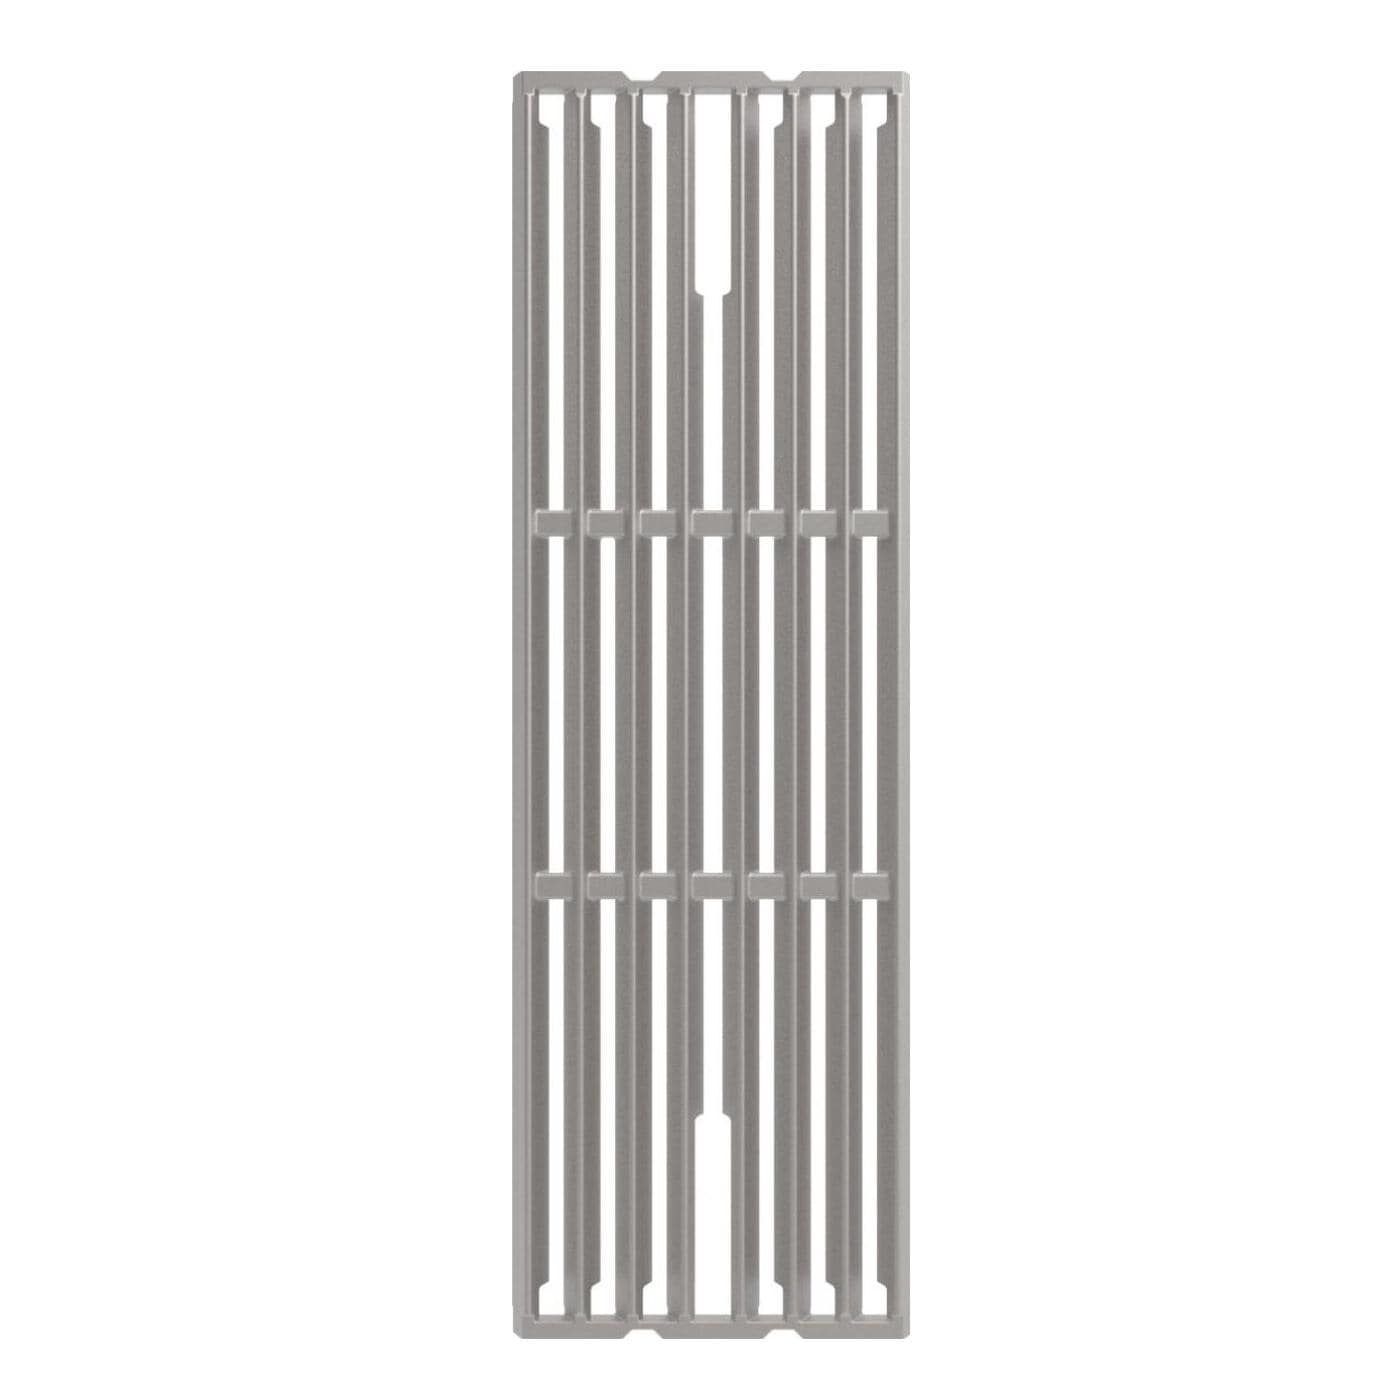 Broil King Cast Stainless Steel Cooking Grates For Regal & Imperial Grills - 11249